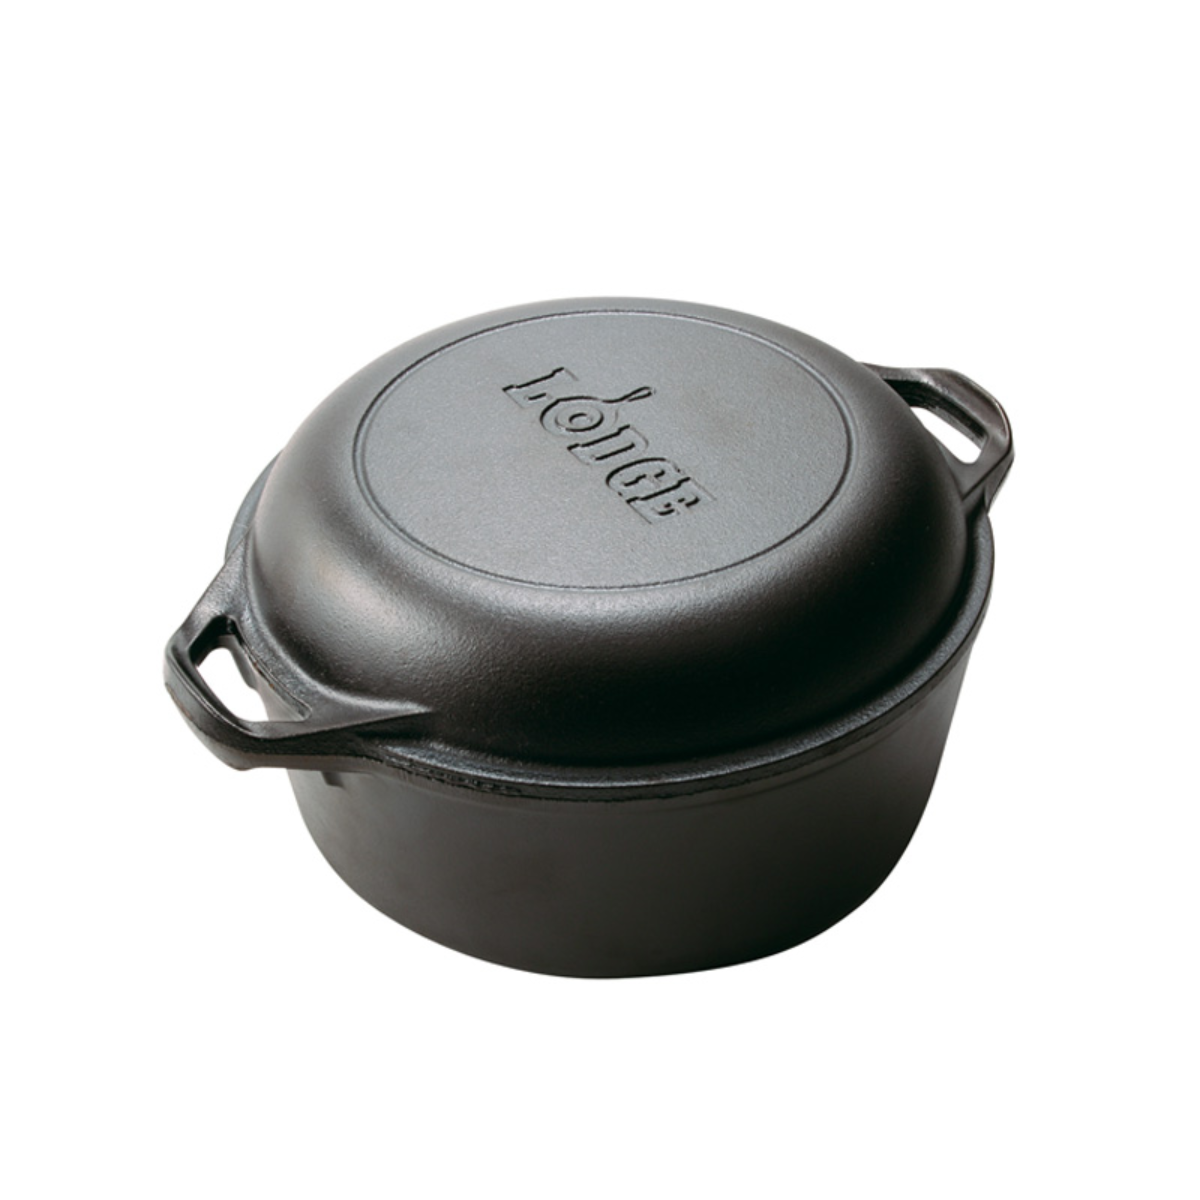 20. Surprise Her with a Timeless and Versatile Cast Iron Dutch Oven